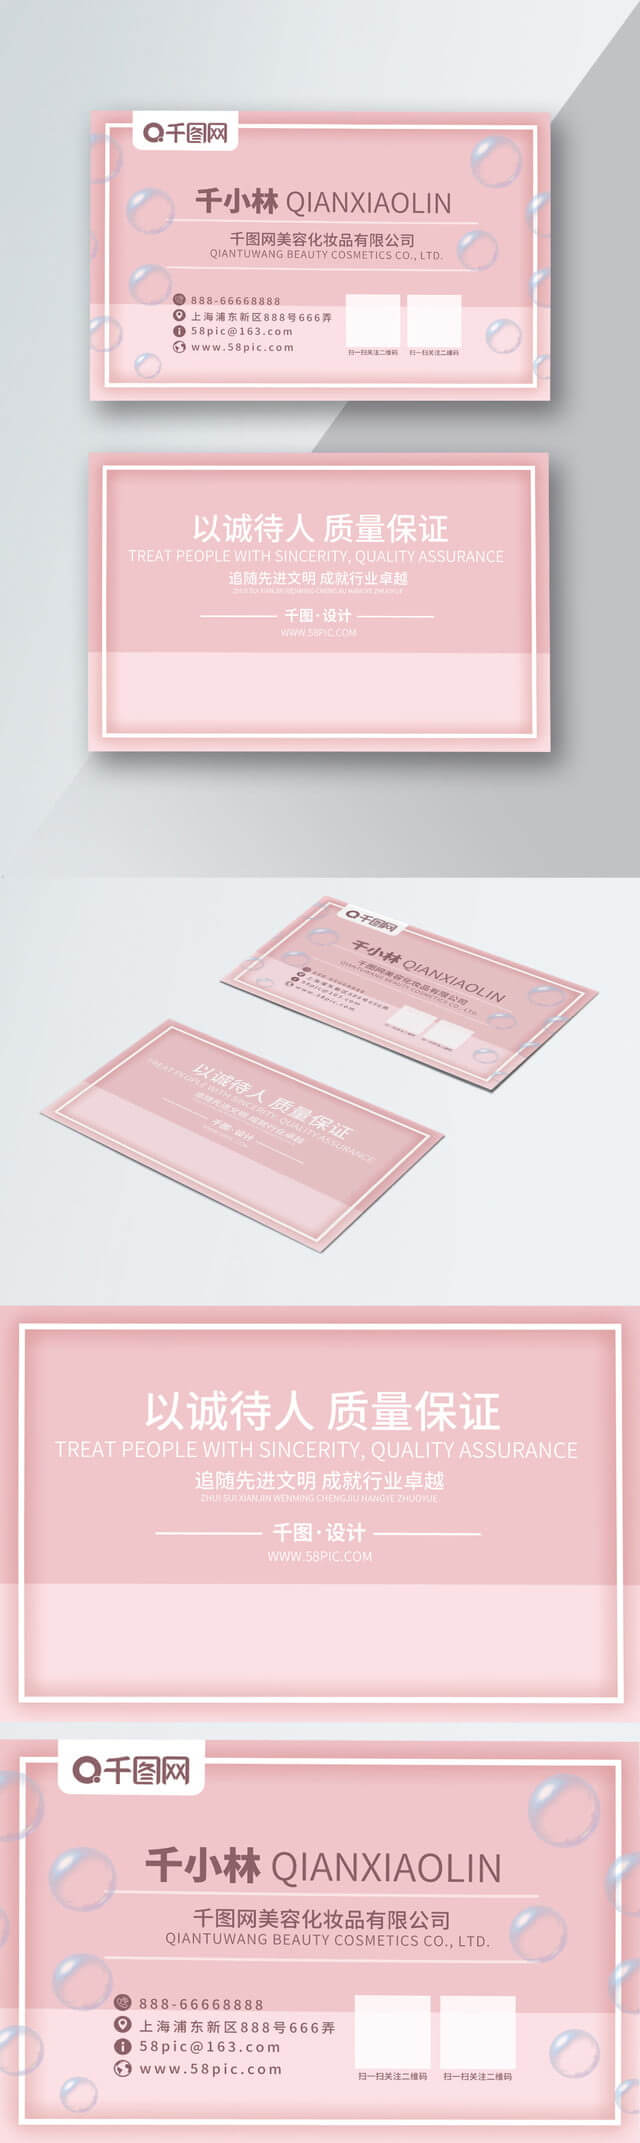 Mary Kay Business Card Free Download Cdr Background Creative Regarding Mary Kay Business Cards Templates Free